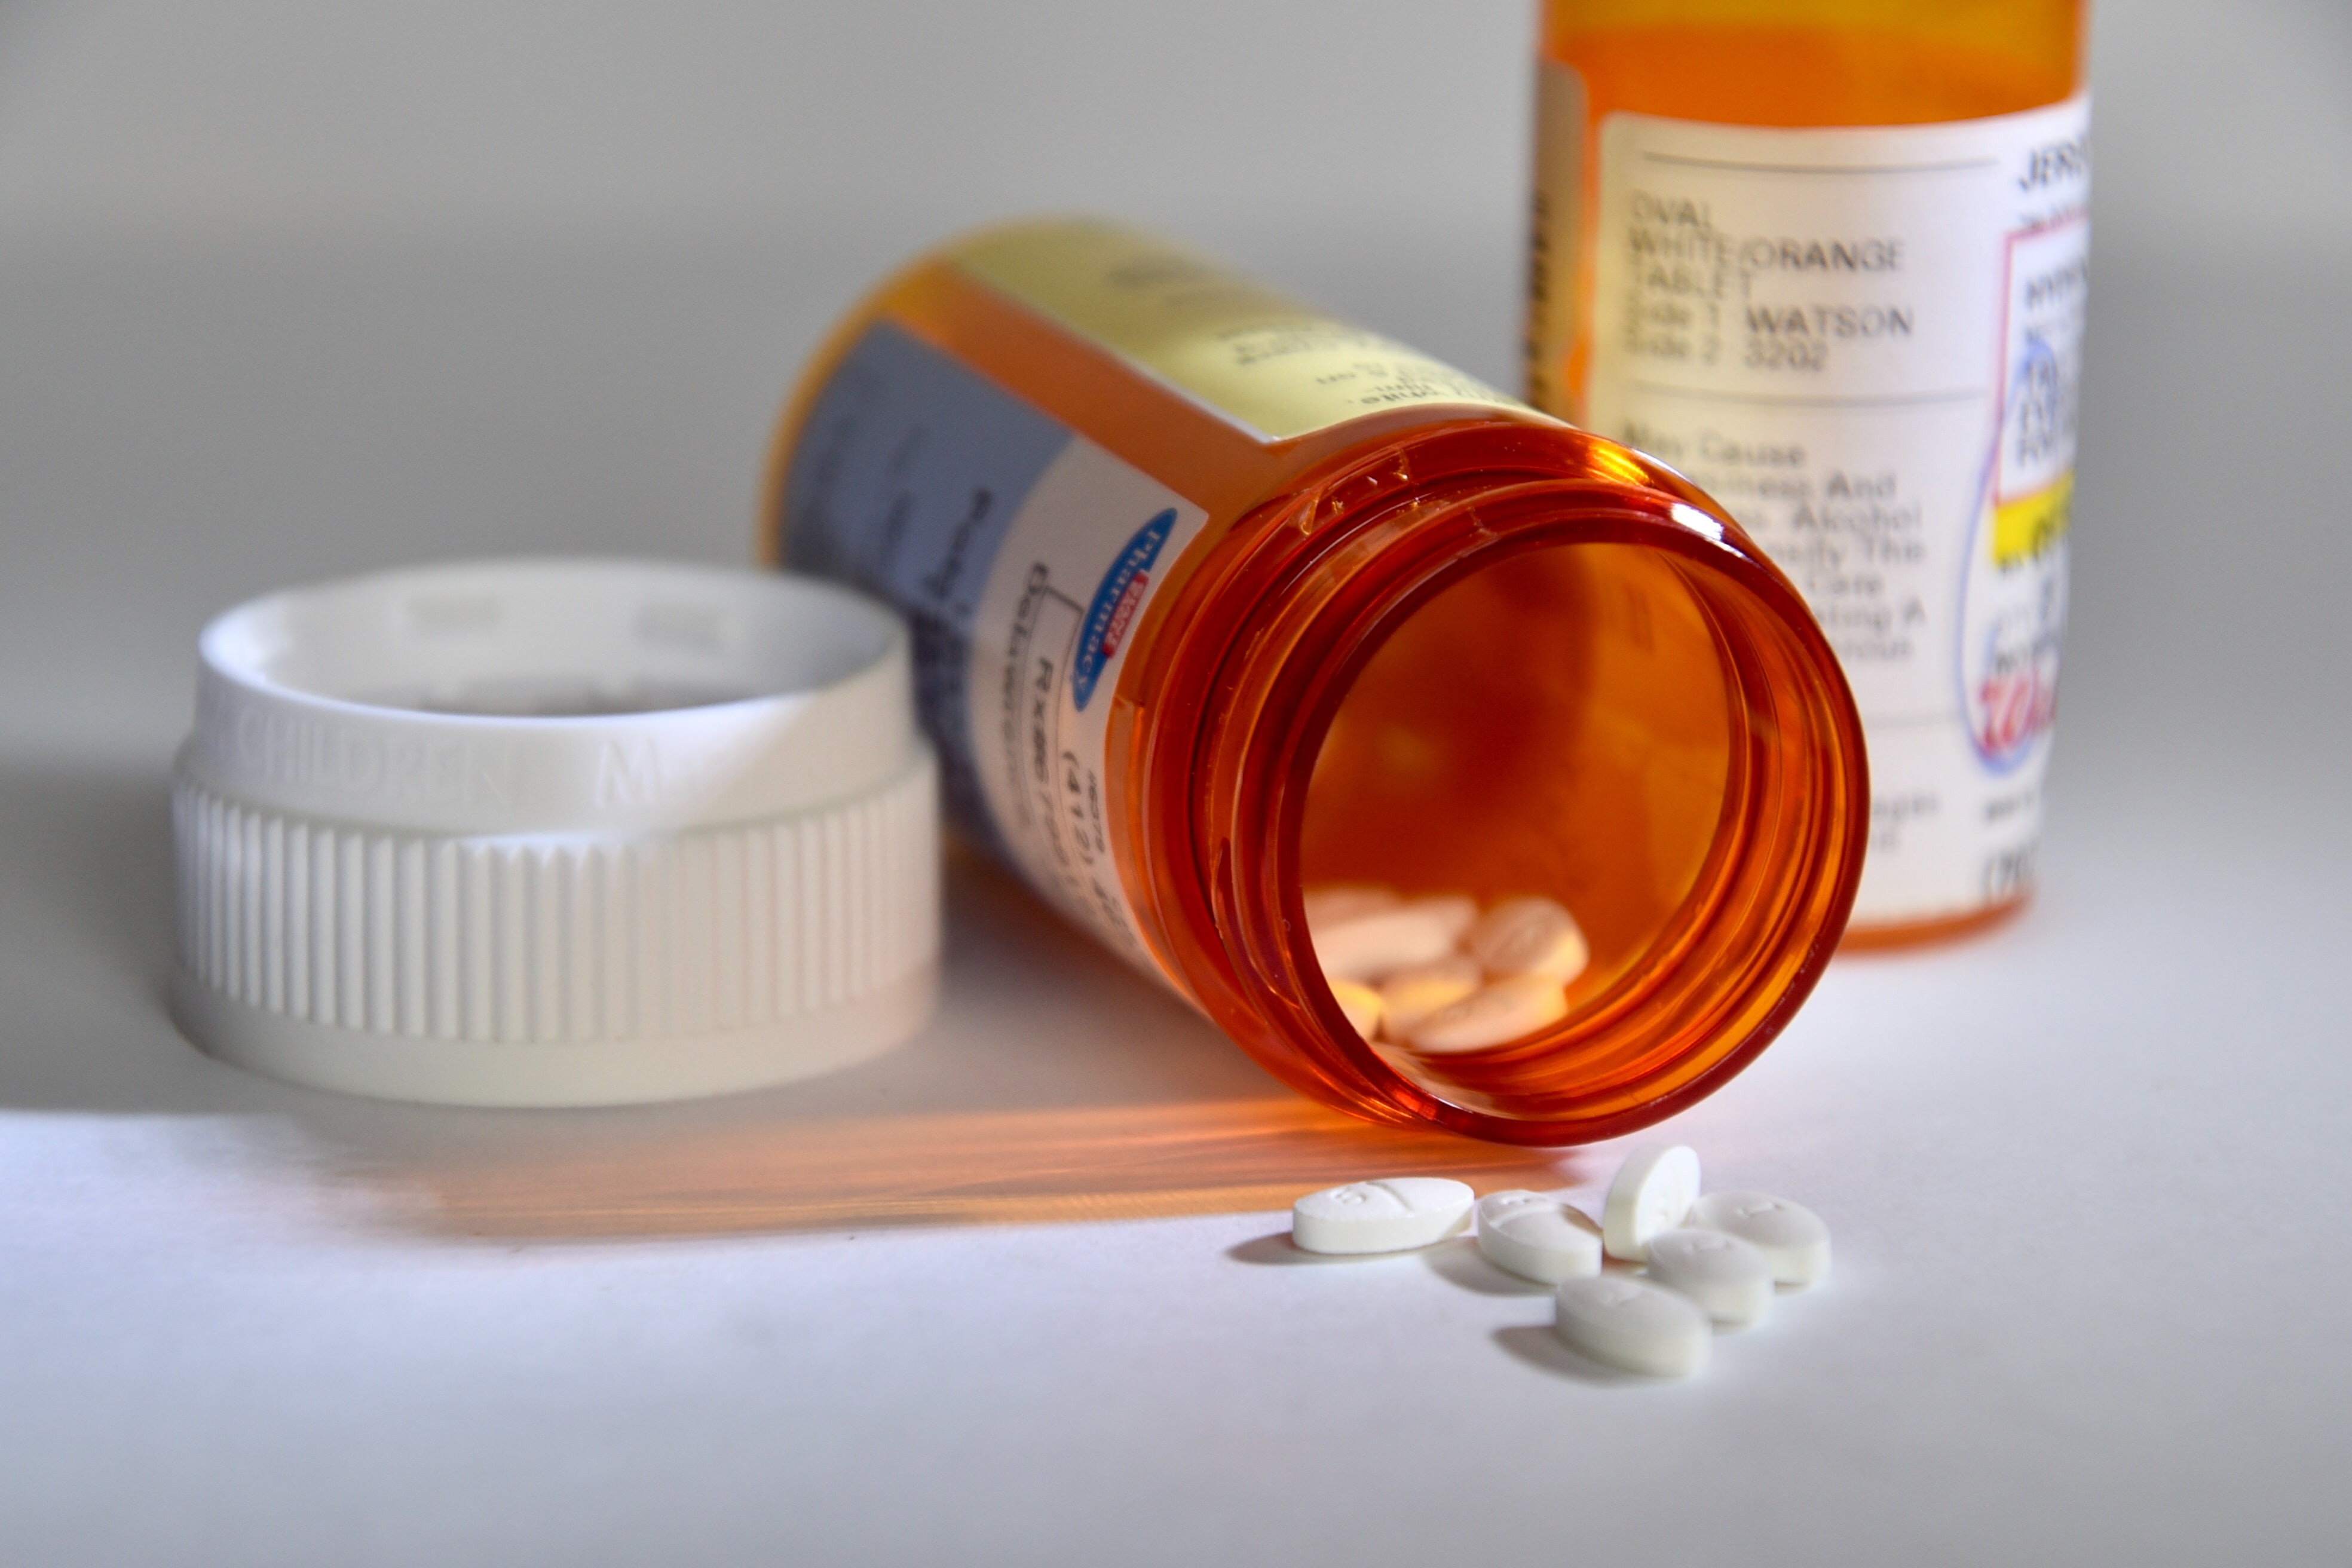 Florida Doc Asked for $35k from Pain Pill Patient